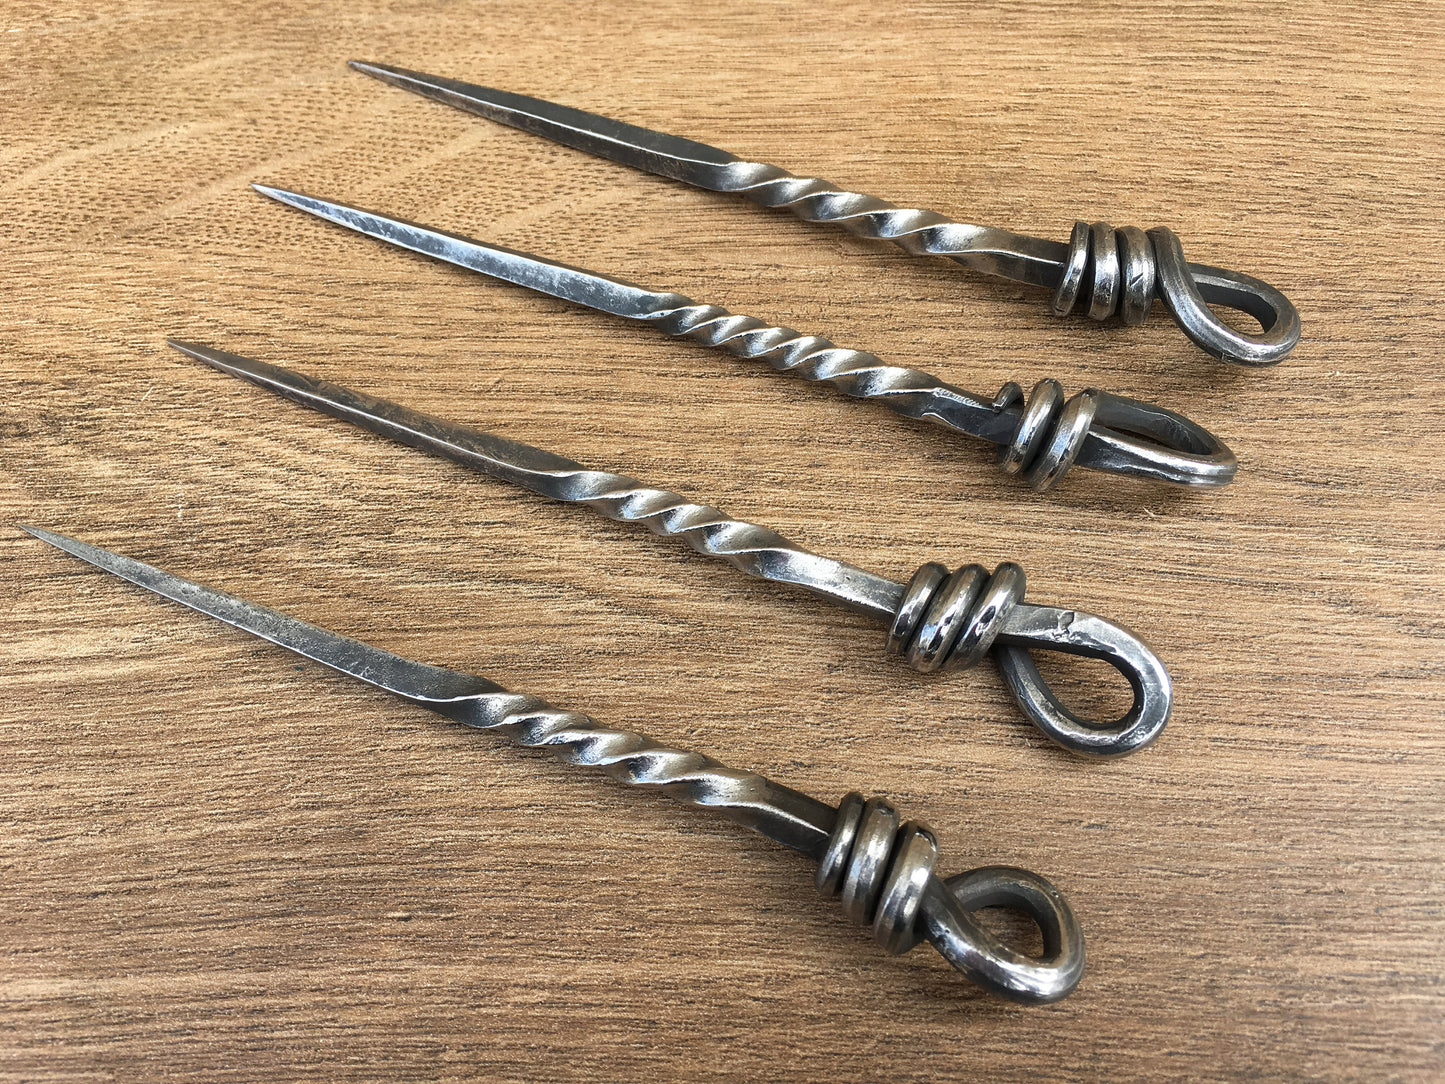 Food pricker, viking cutlery, stainless steel viking skewers, medieval kitchen, middle ages, reenactment, grill tools, camp equipment,viking